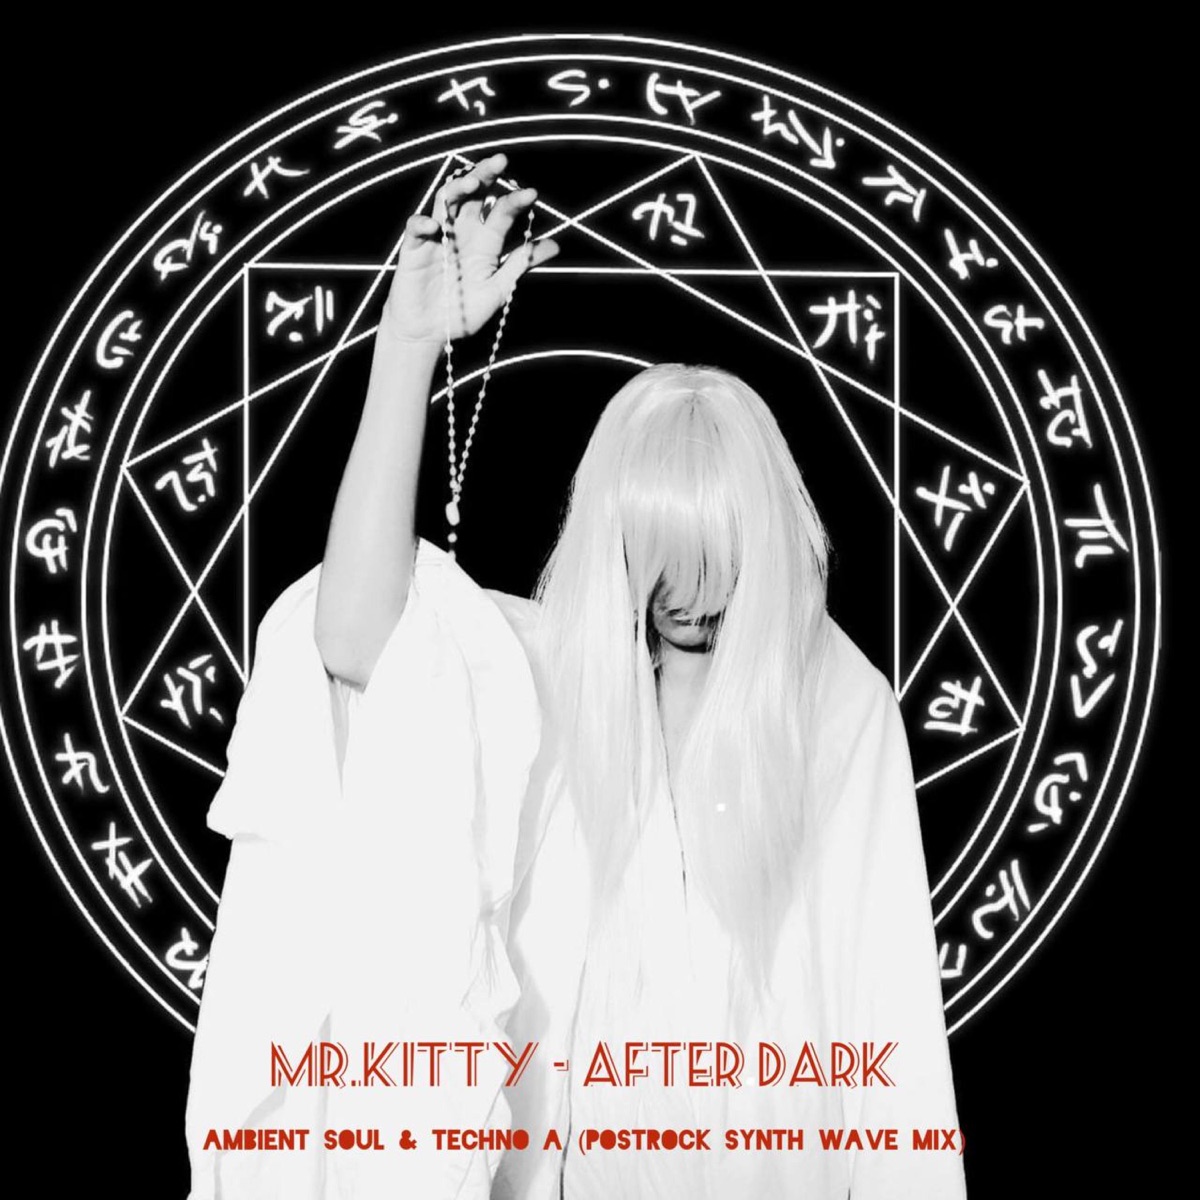 Play mr.kitty after dark Slowed+Reverq by Techno_Andrey on